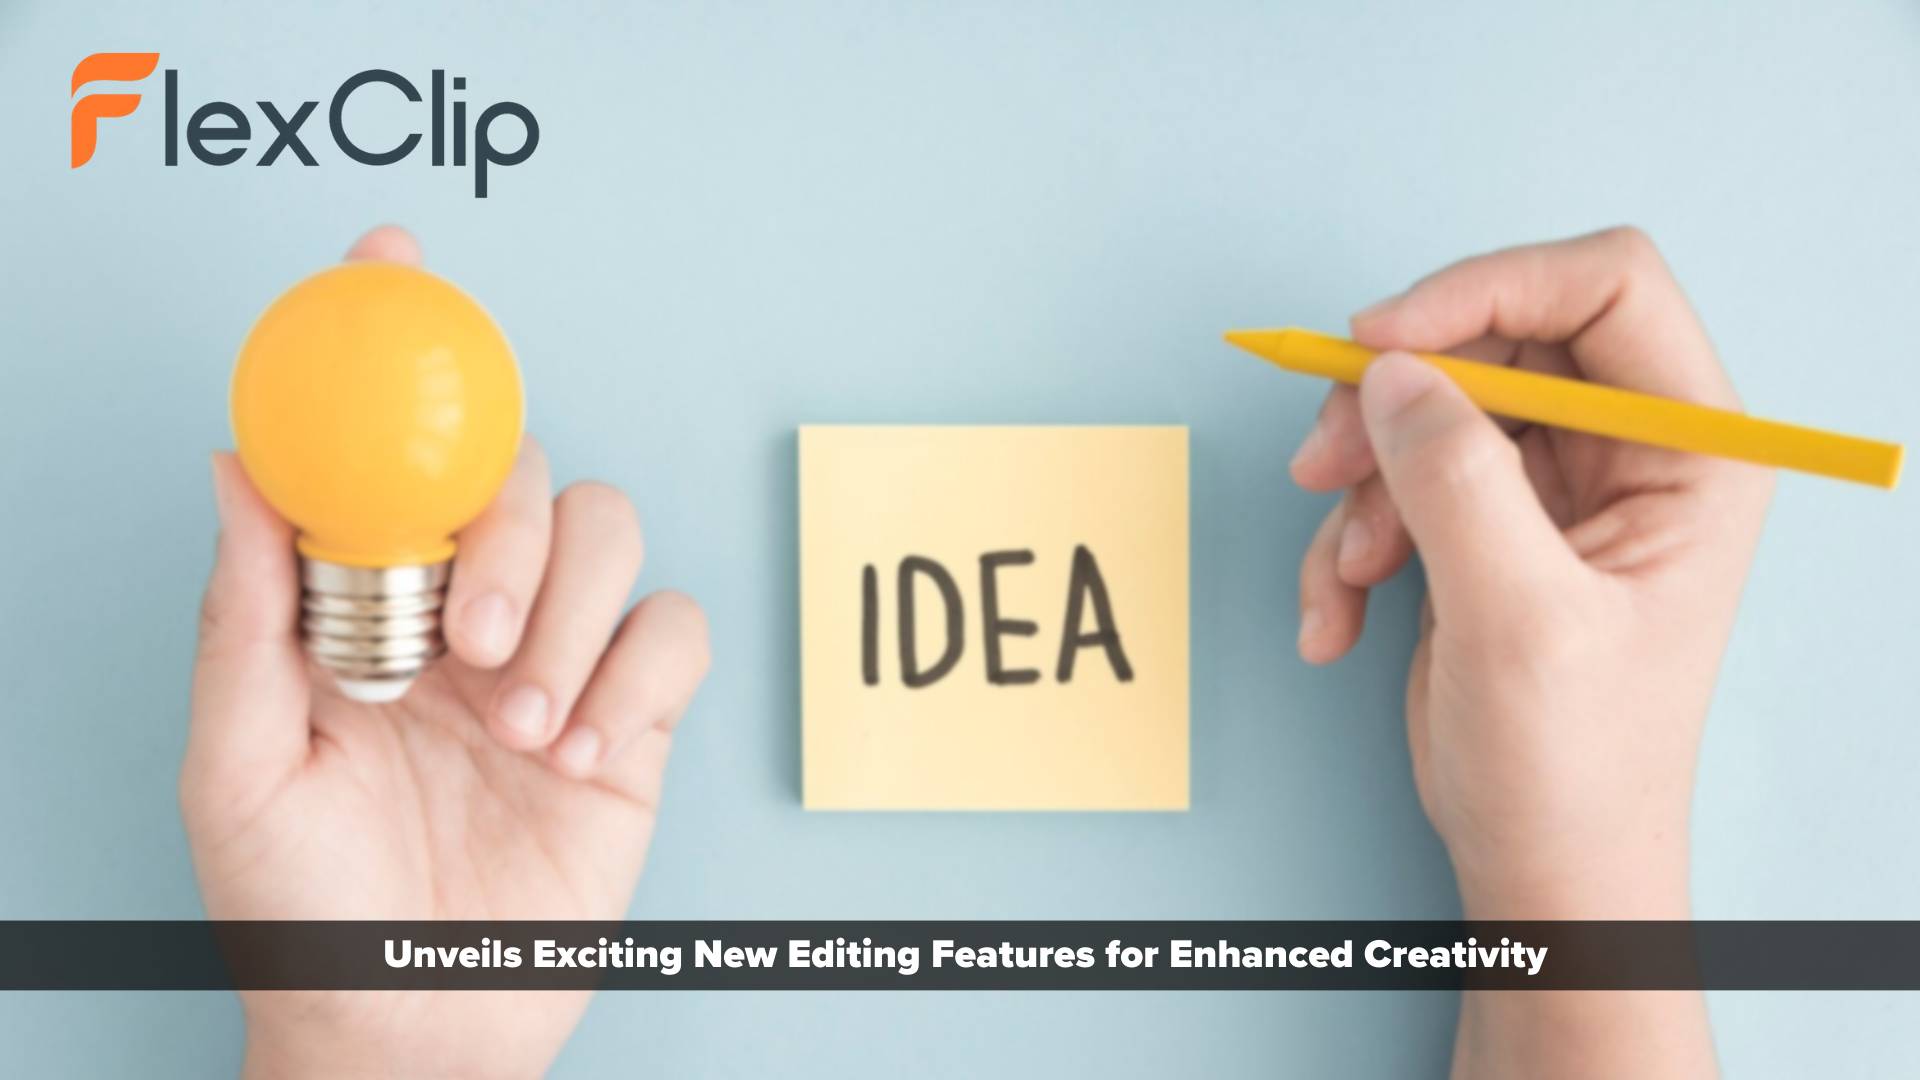 FlexClip Unveils Exciting New Editing Features for Enhanced Creativity